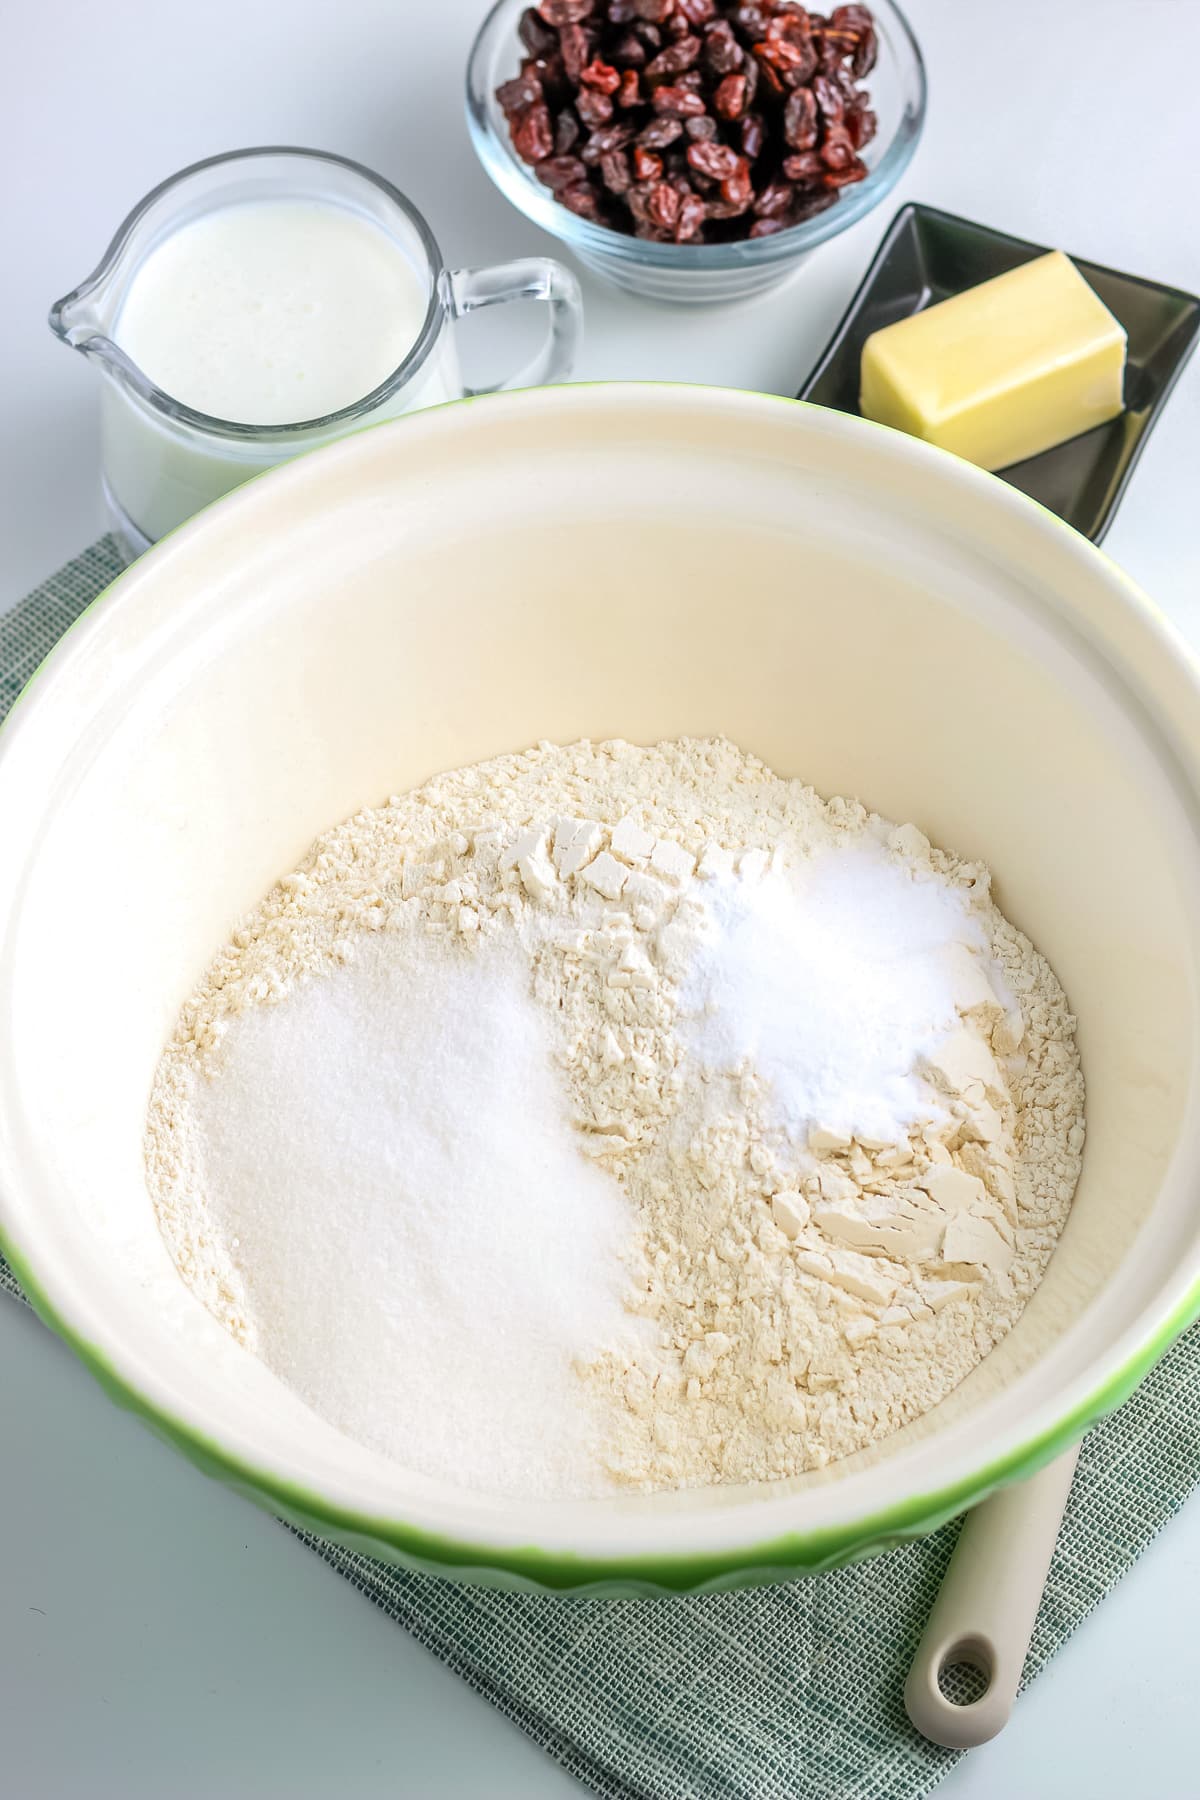 Mixing together flour, salt, sugar and other dry ingredients for Irish soda bread in a large mixing bowl.